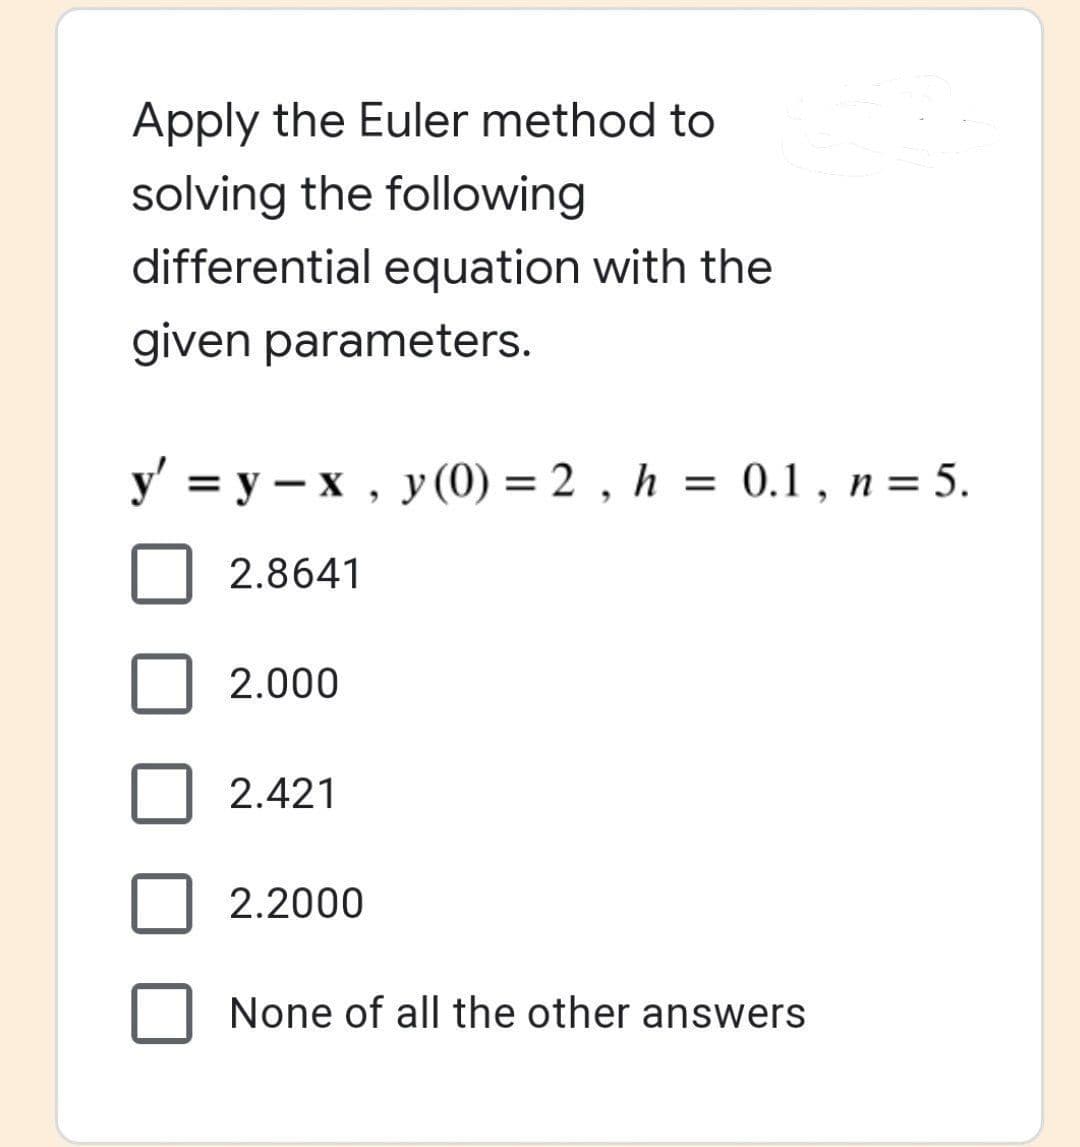 Apply the Euler method to
solving the following
differential equation with the
given parameters.
y' =y-x, y (0) = 2, h = 0.1, n = 5.
2.8641
2.000
2.421
2.2000
None of all the other answers